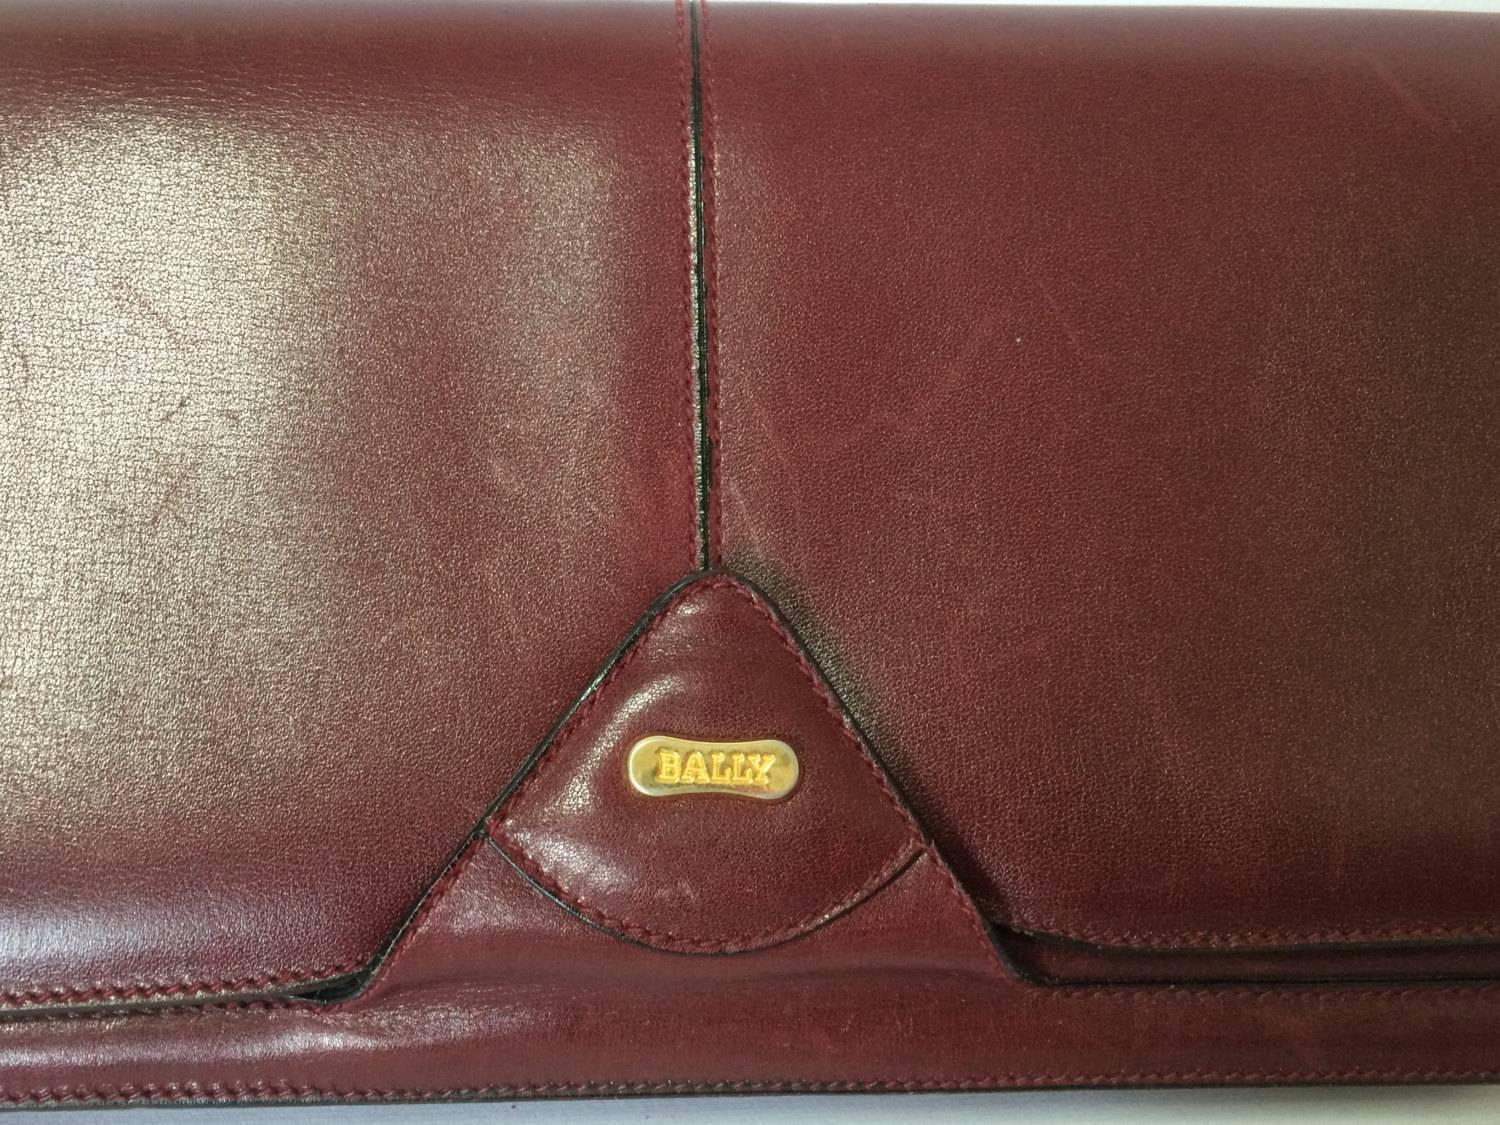 1980s. Vintage Bally wine leather clutch bag, party and classic purse with gold tone logo motif. Unisex use.

Introducing another masterpiece vintage purse from BALLY back in the 80's. 
Classic wine color leather.
Featuring a golden embossed